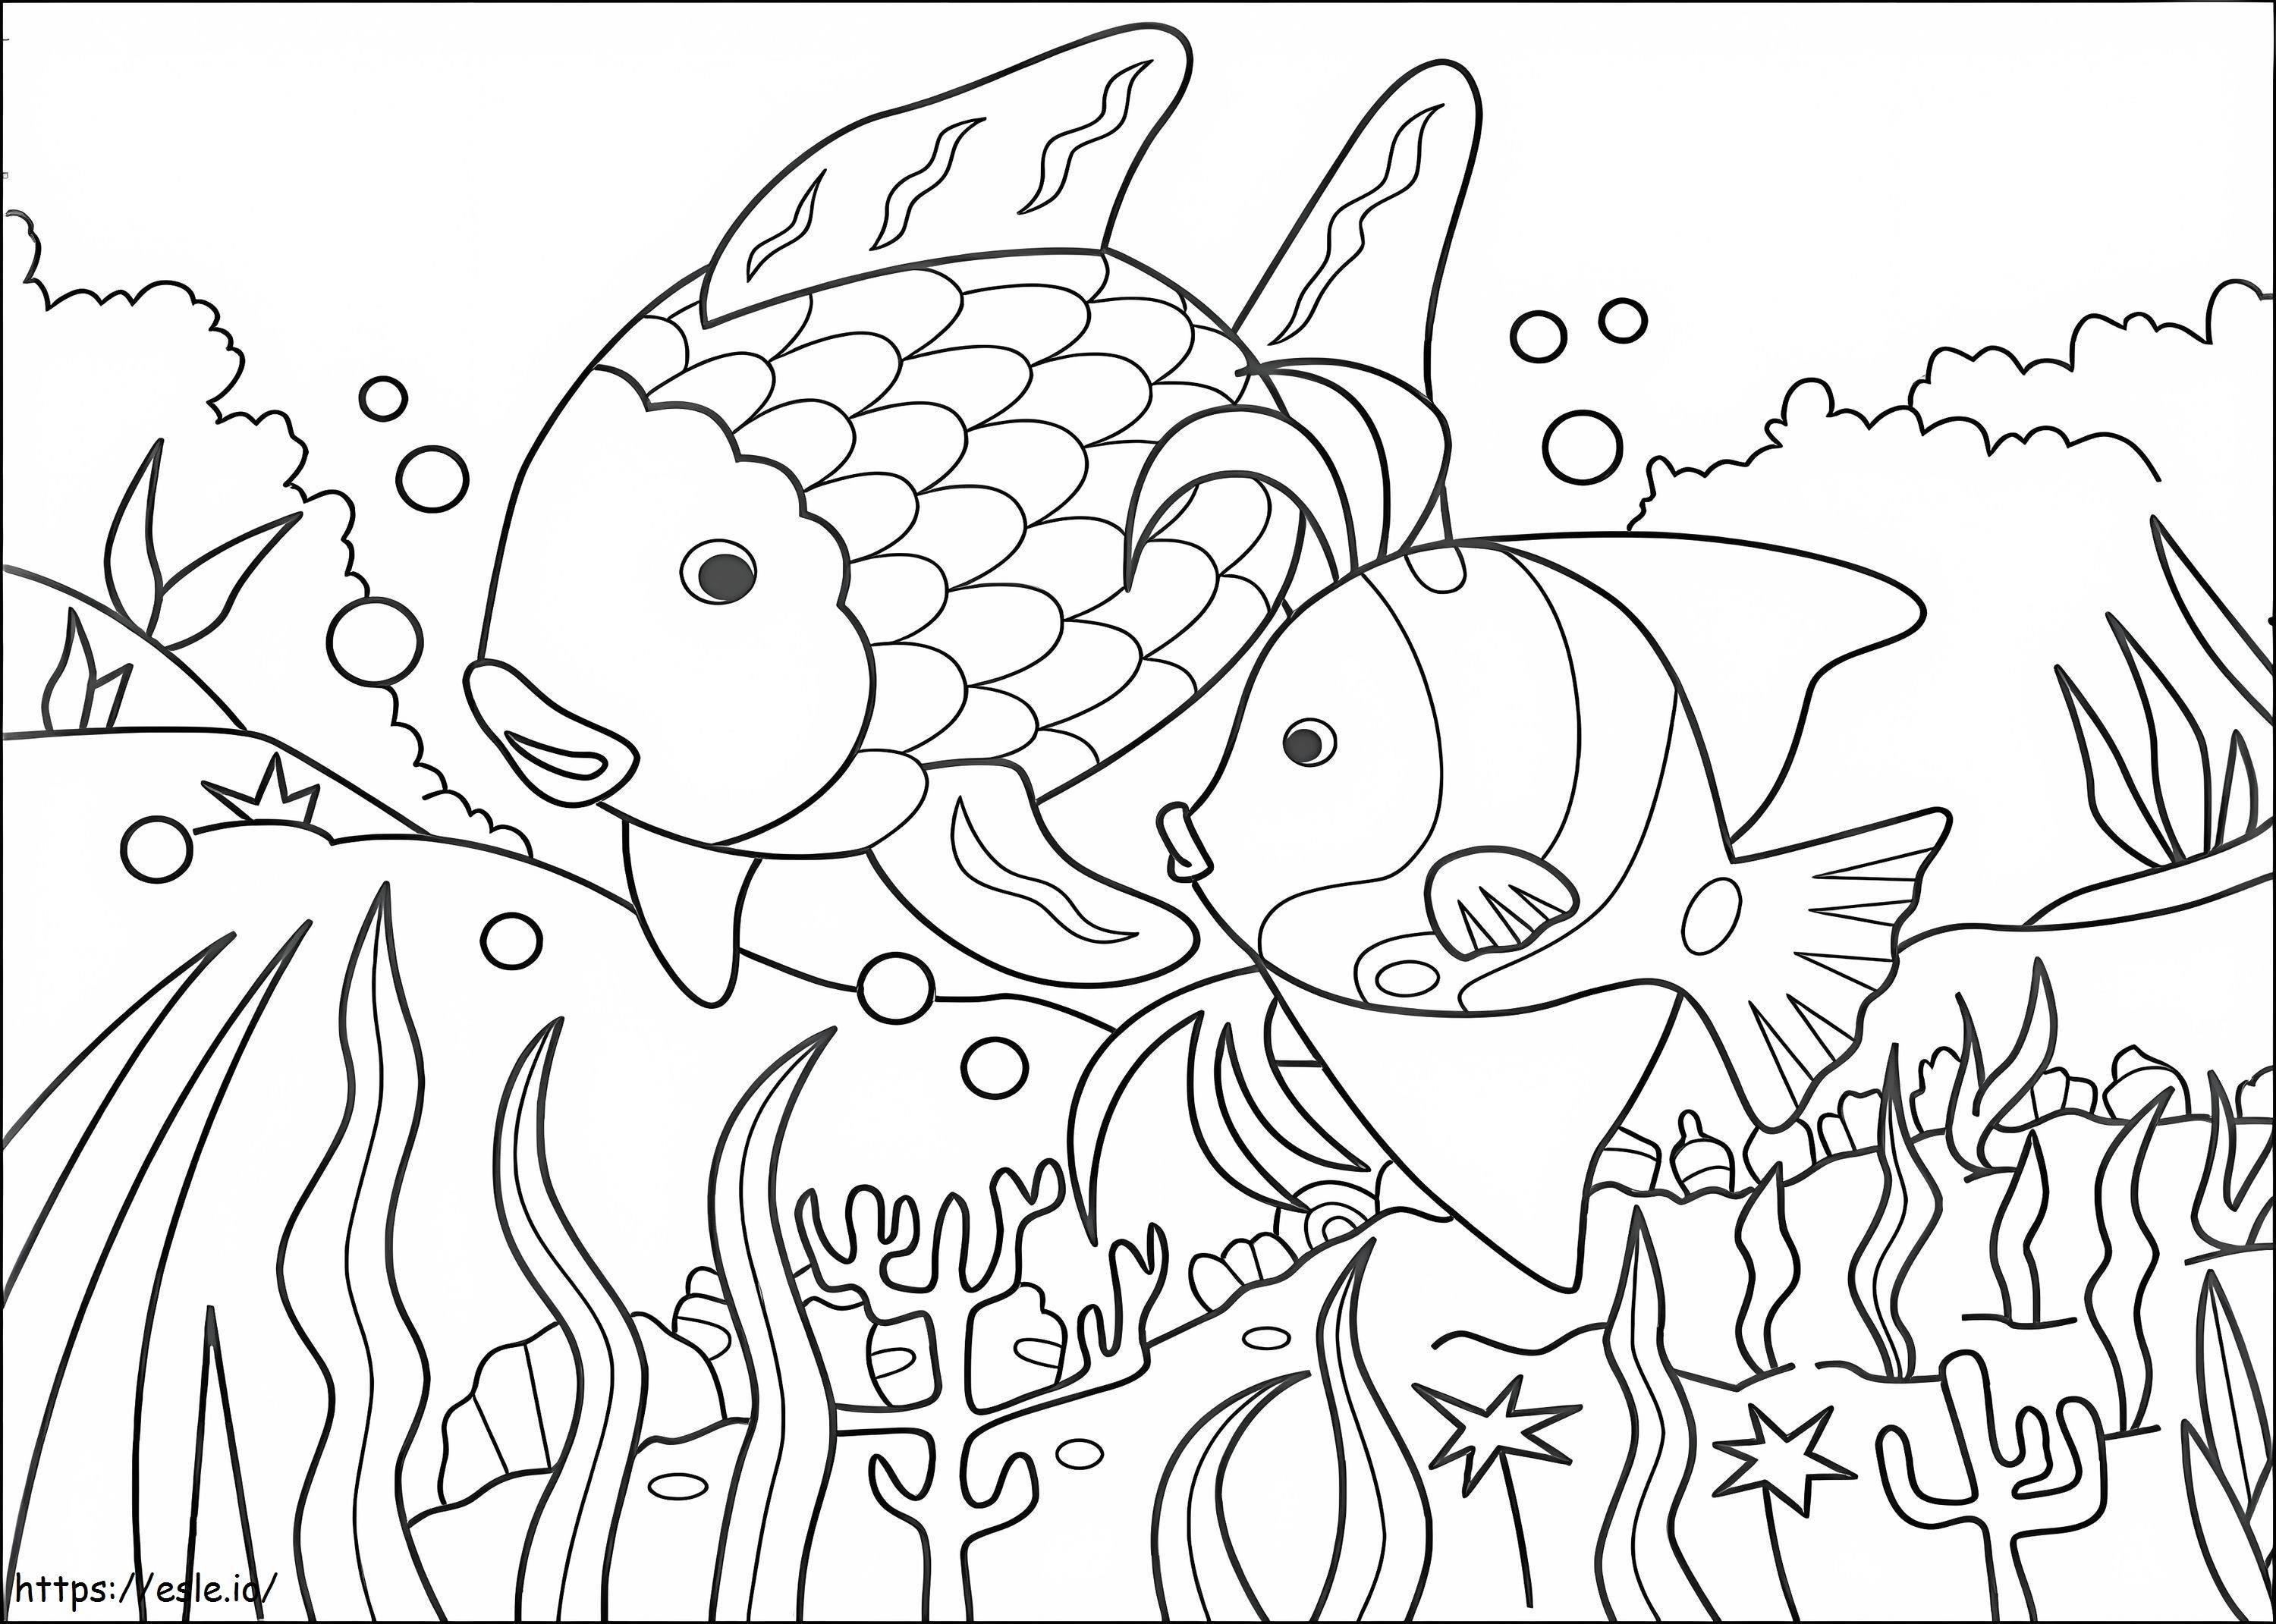 Two Simple Fish coloring page